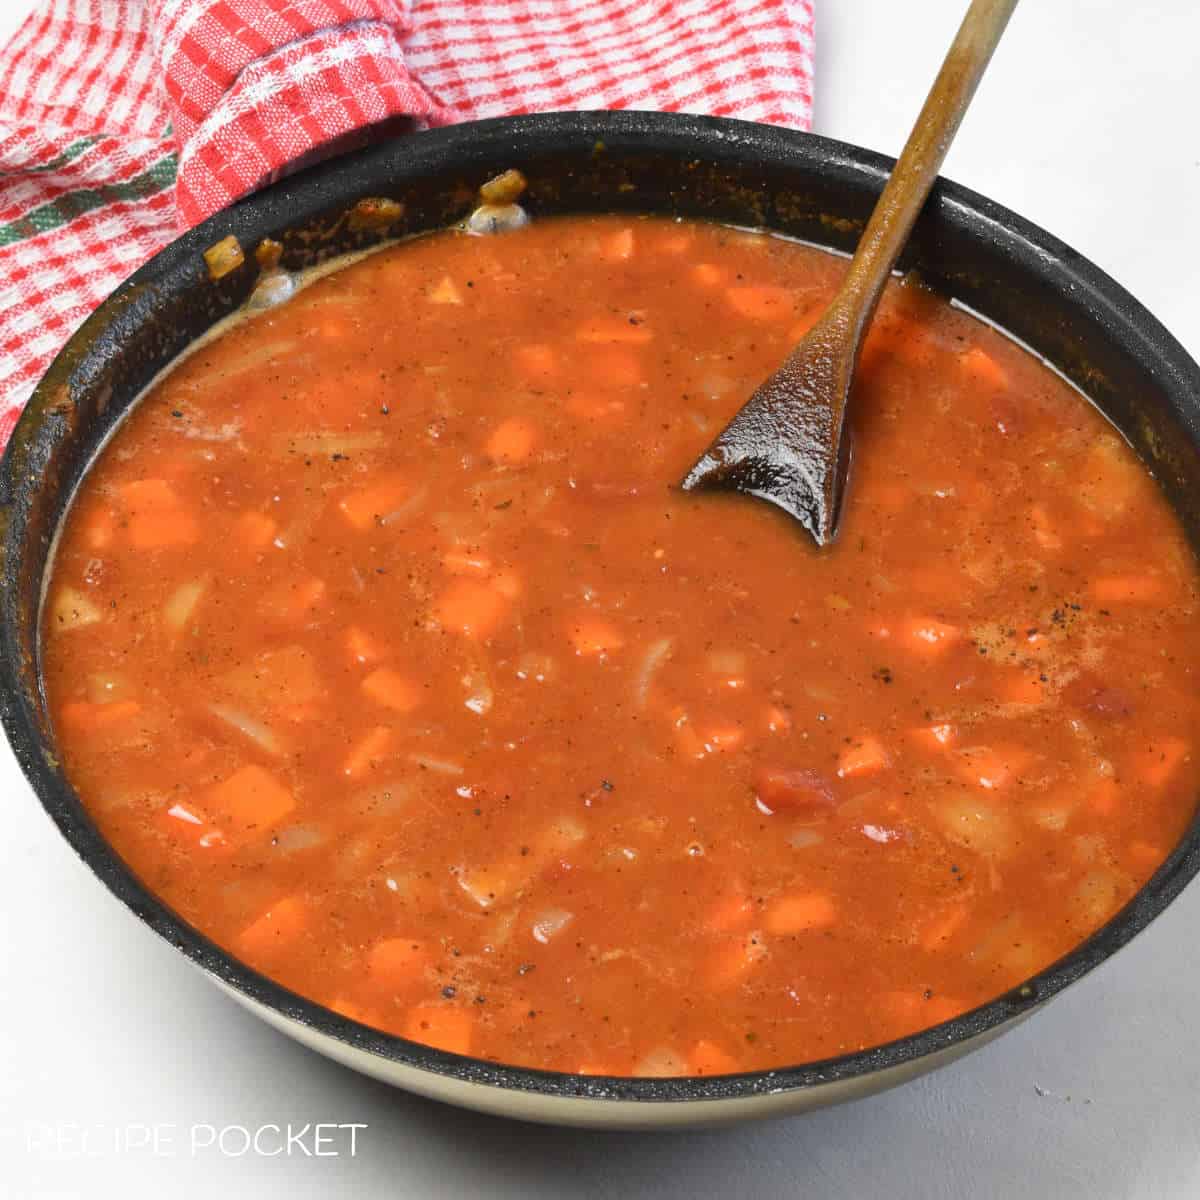 Tomato sauce mixture in a frying pan.